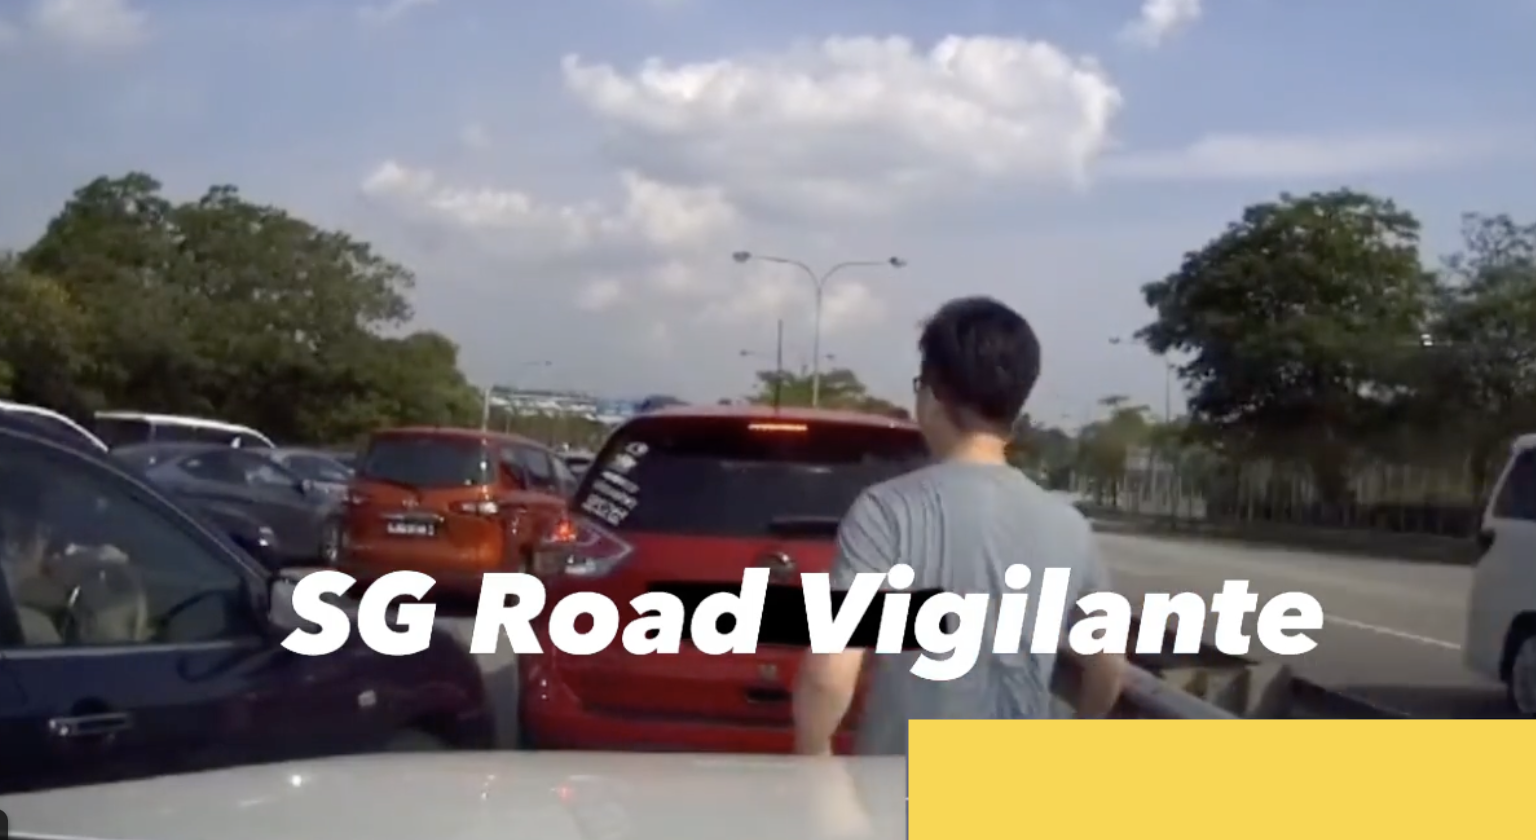 Passenger of sg-registered car blocks traffic with his body to help it 'cut lane' at jb-sg causeway 4